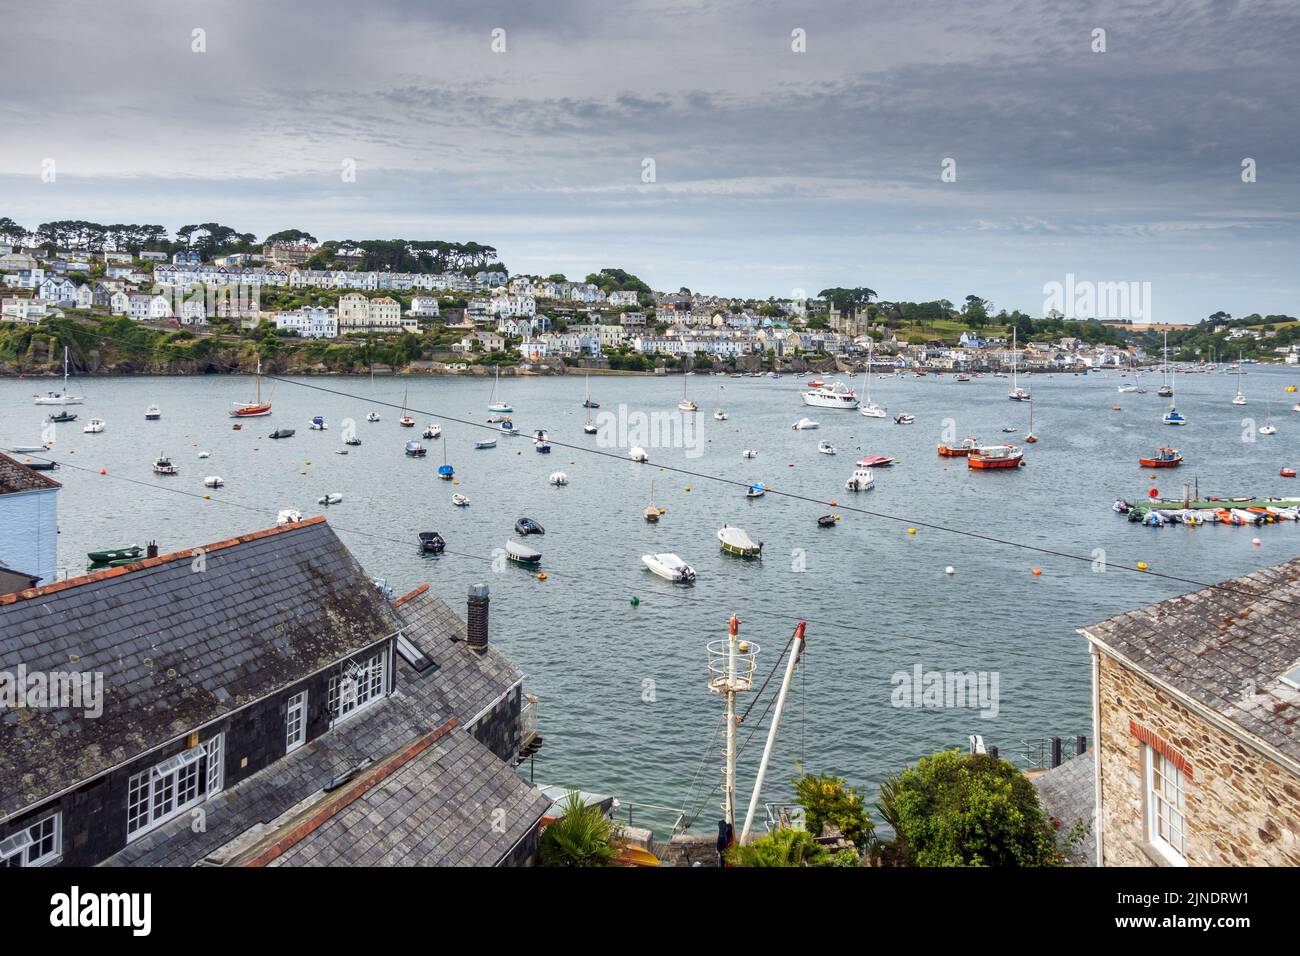 Fowey captured from the Polruan side of the River Fowey Estuary in Cornwall. Stock Photo